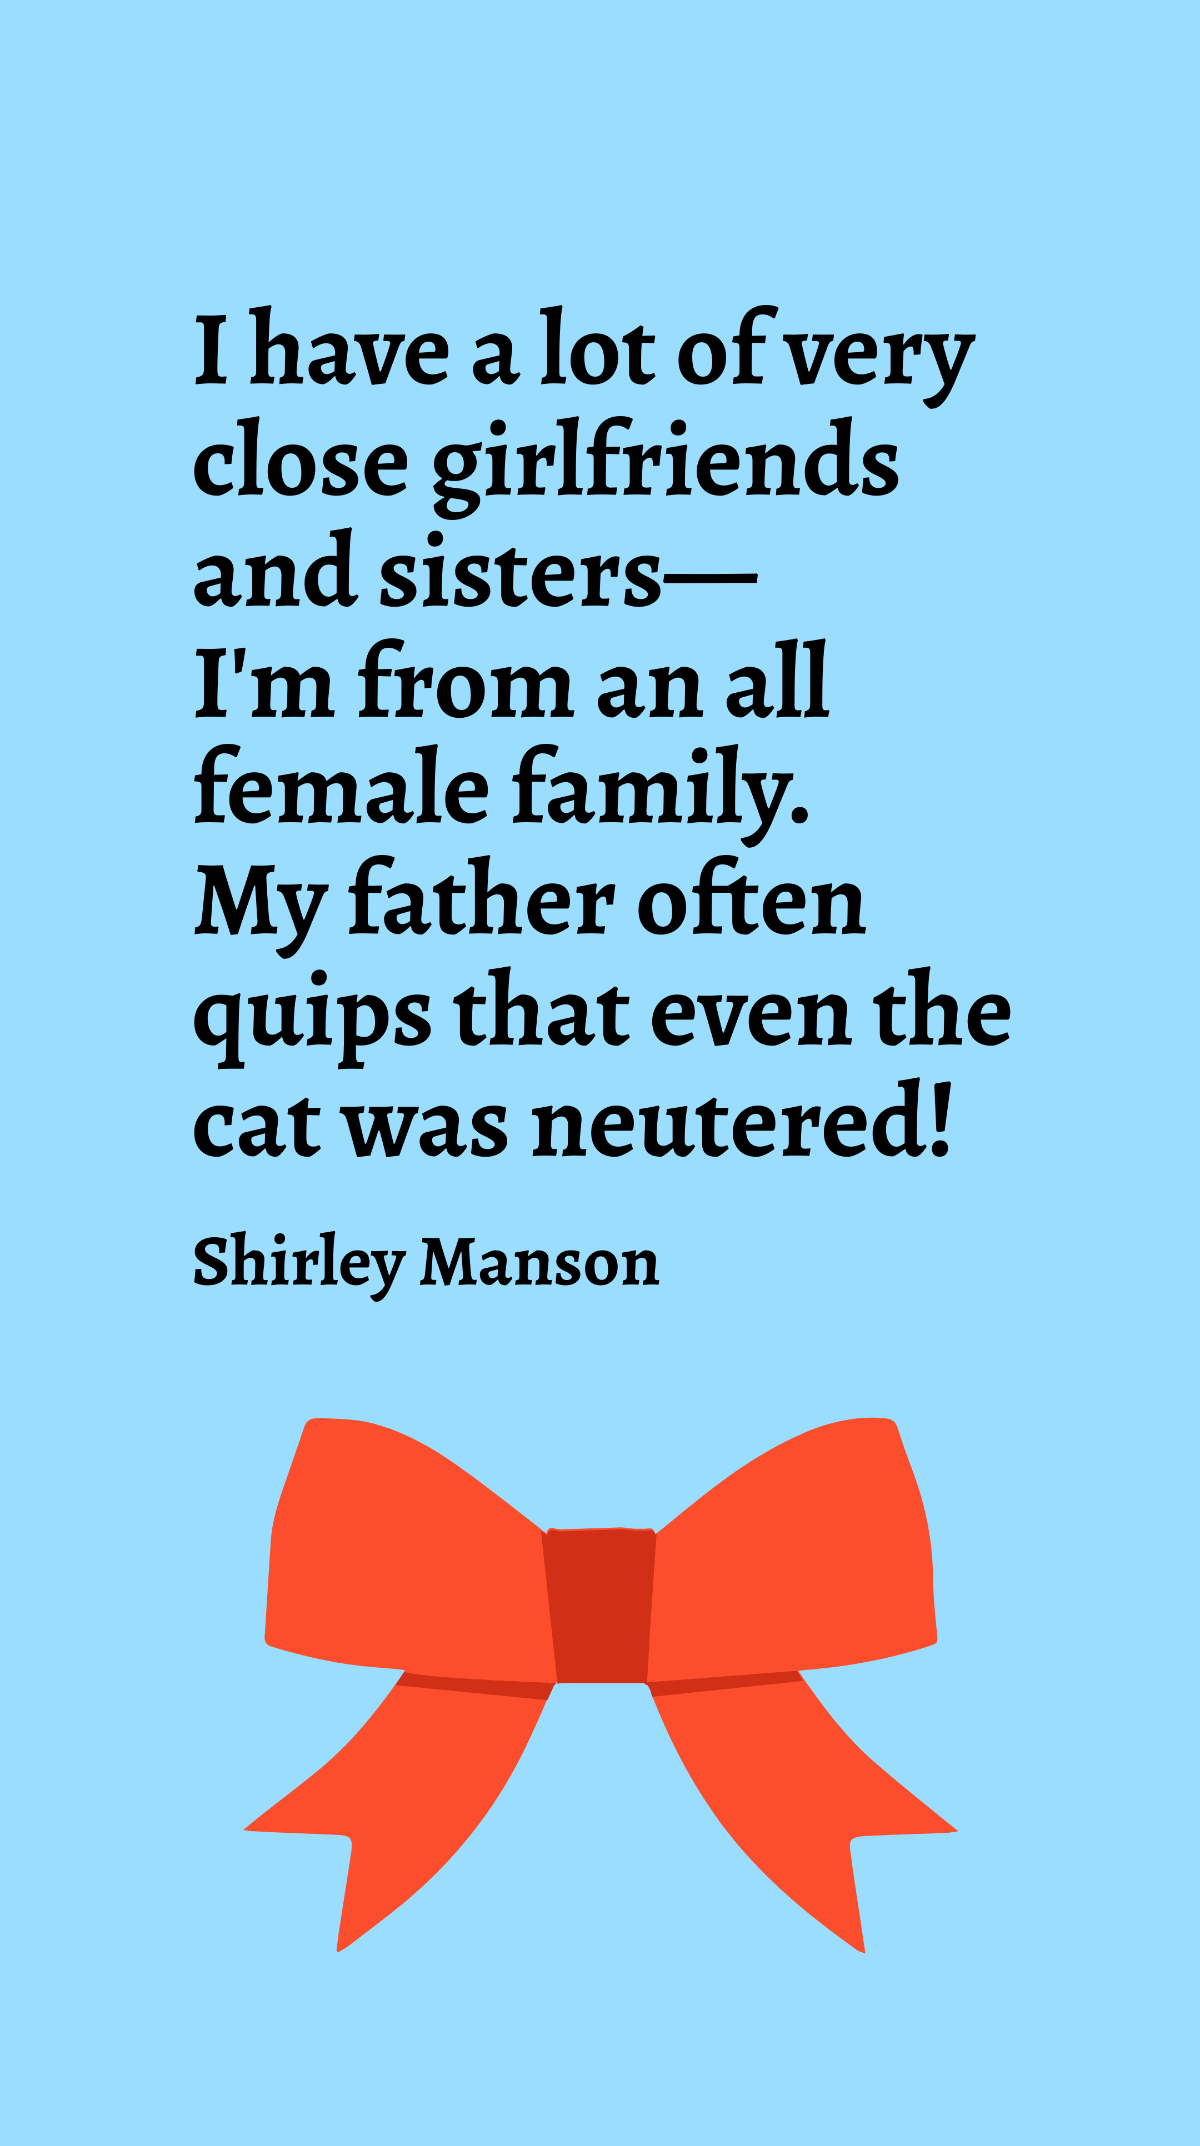 Shirley Manson - I have a lot of very close girlfriends and sisters - I'm from an all female family. My father often quips that even the cat was neutered!